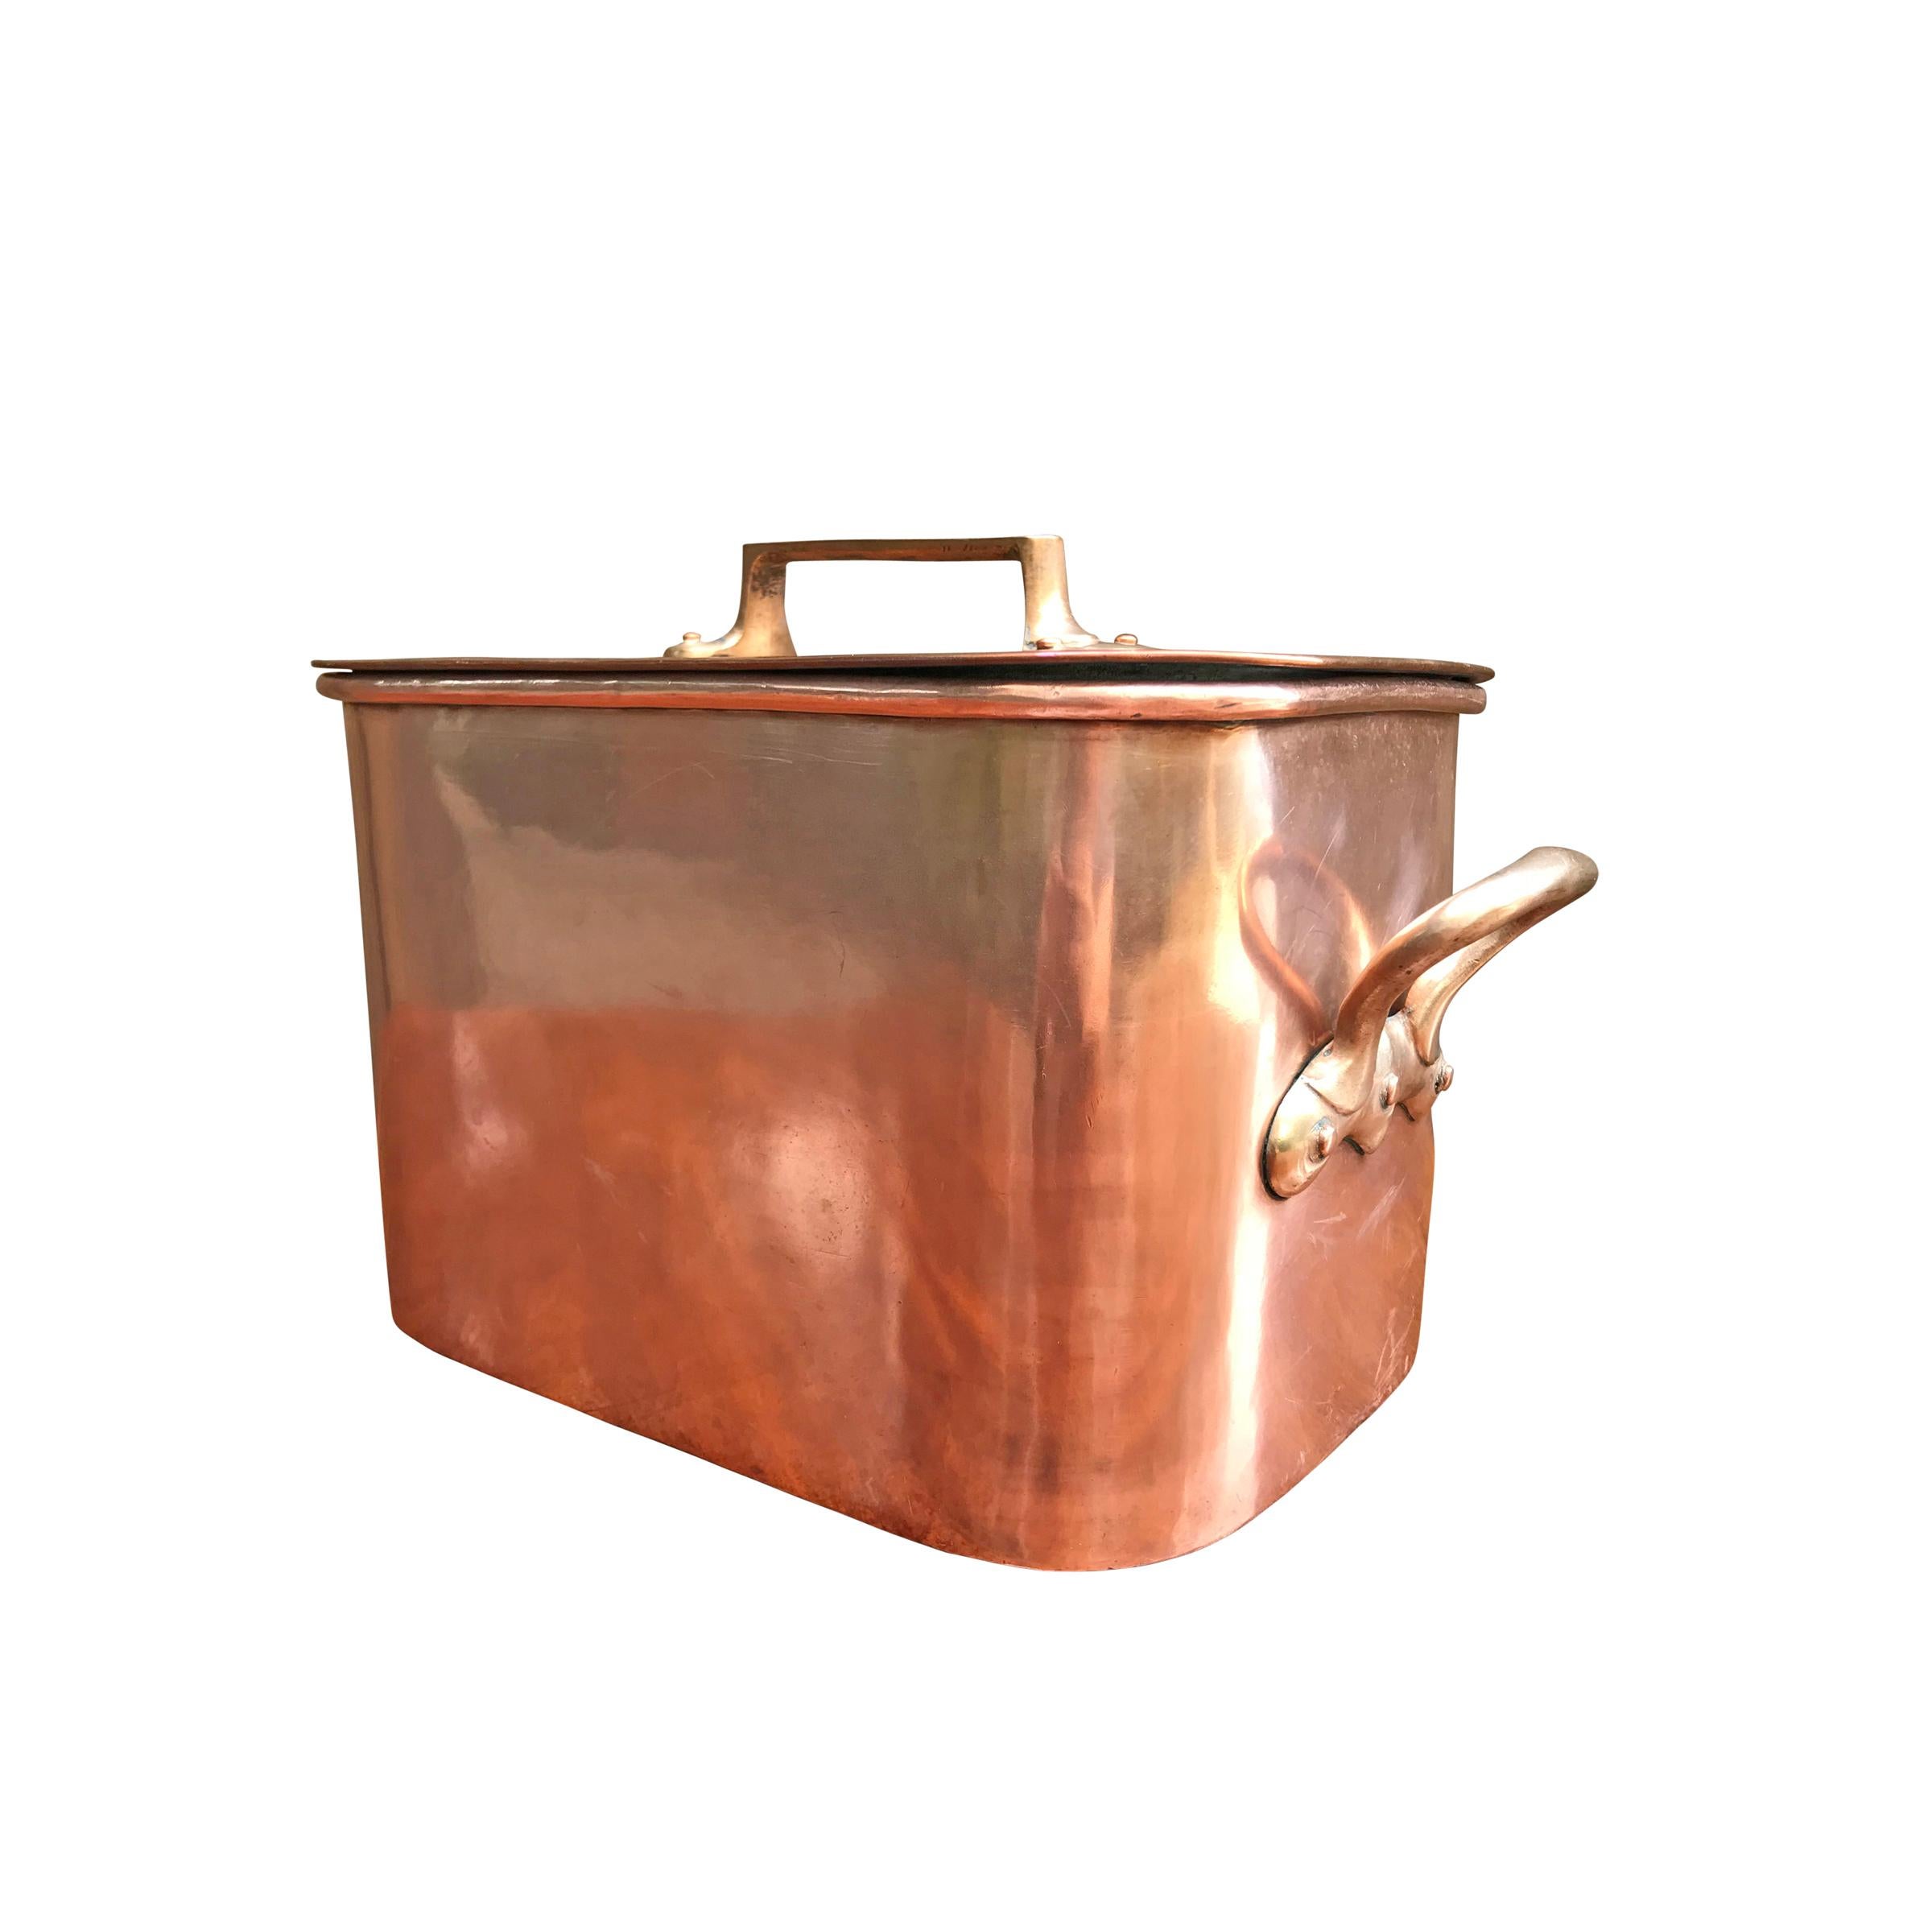 A wonderful late 19th century French copper Daubiere by J. Jacquotot with bronze handles, dovetailed joinery up the sides and around the bottom, and a lid with a bronze handle. Daubiere are braising pans used to roast meat with vegetables and broth